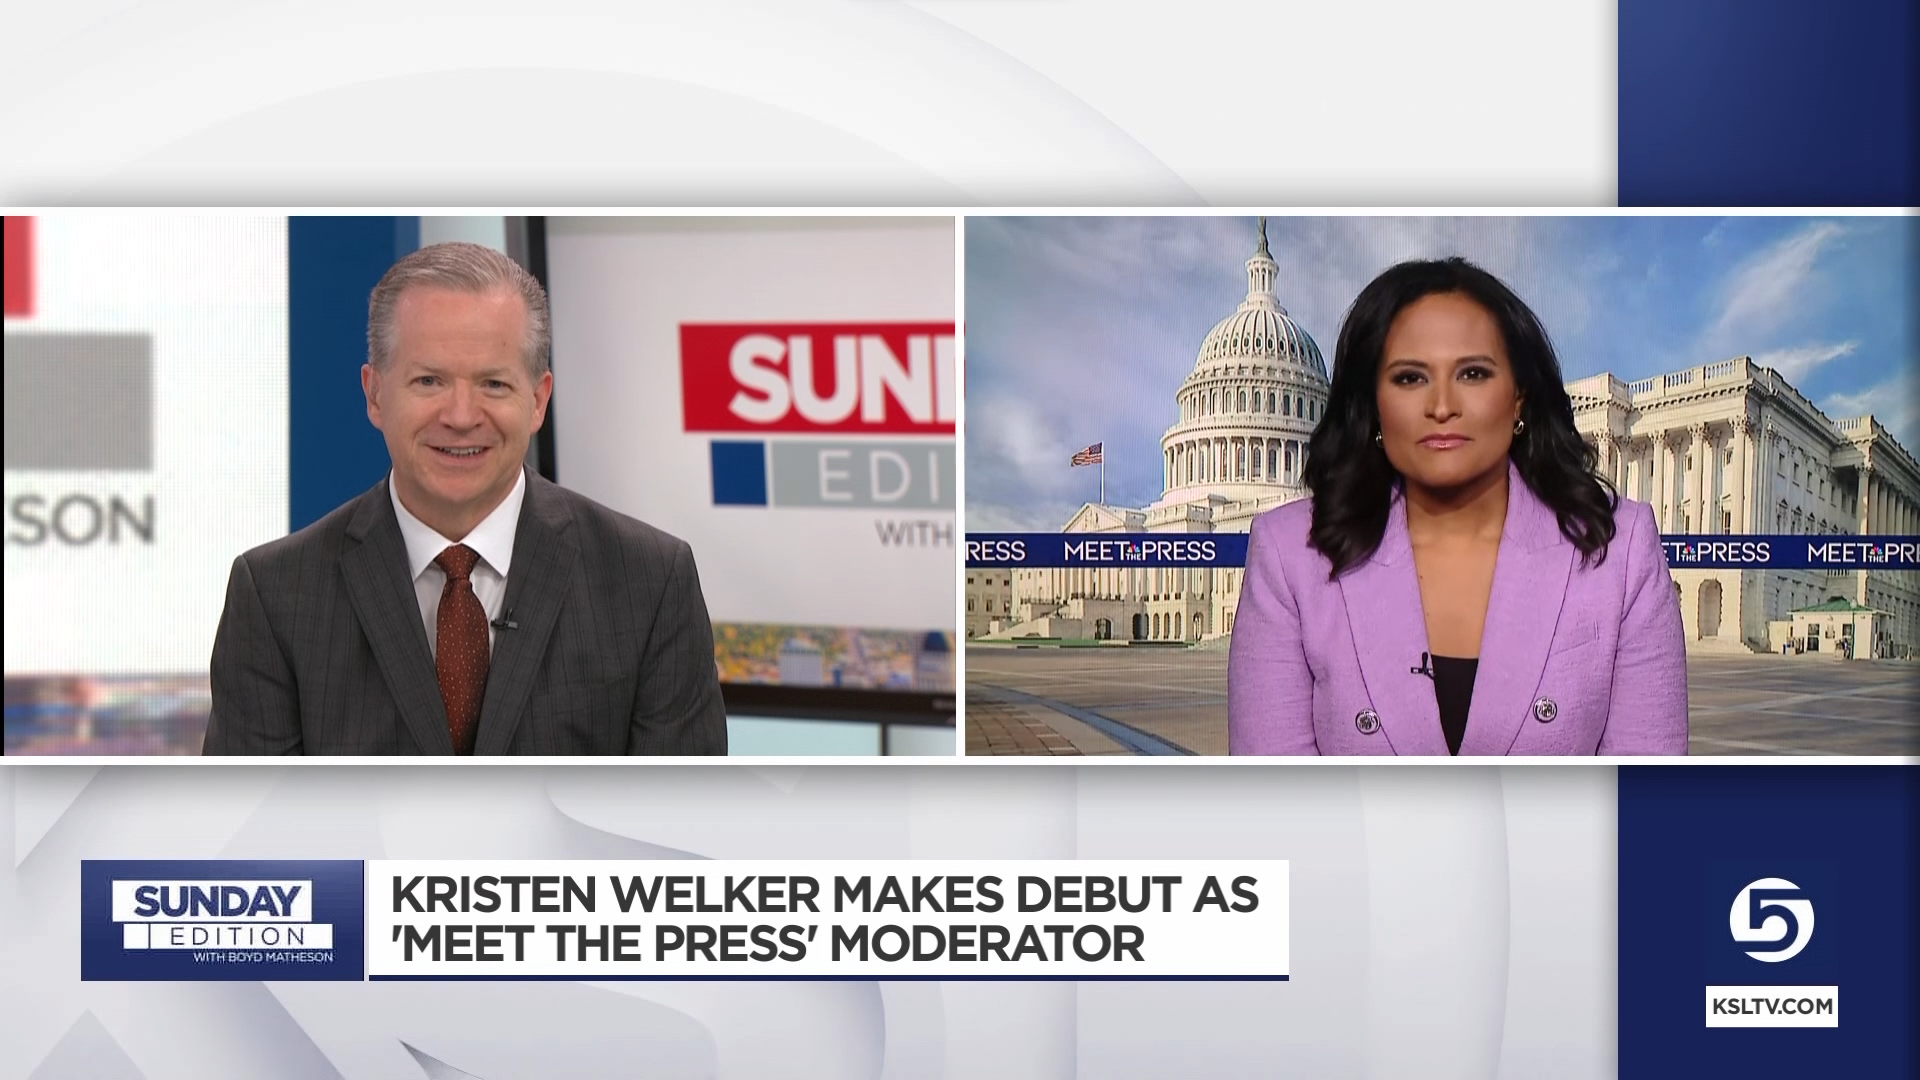 This week on Sunday Edition, Boyd Matheson talks with Kristen Welker as she steps into the moderato...